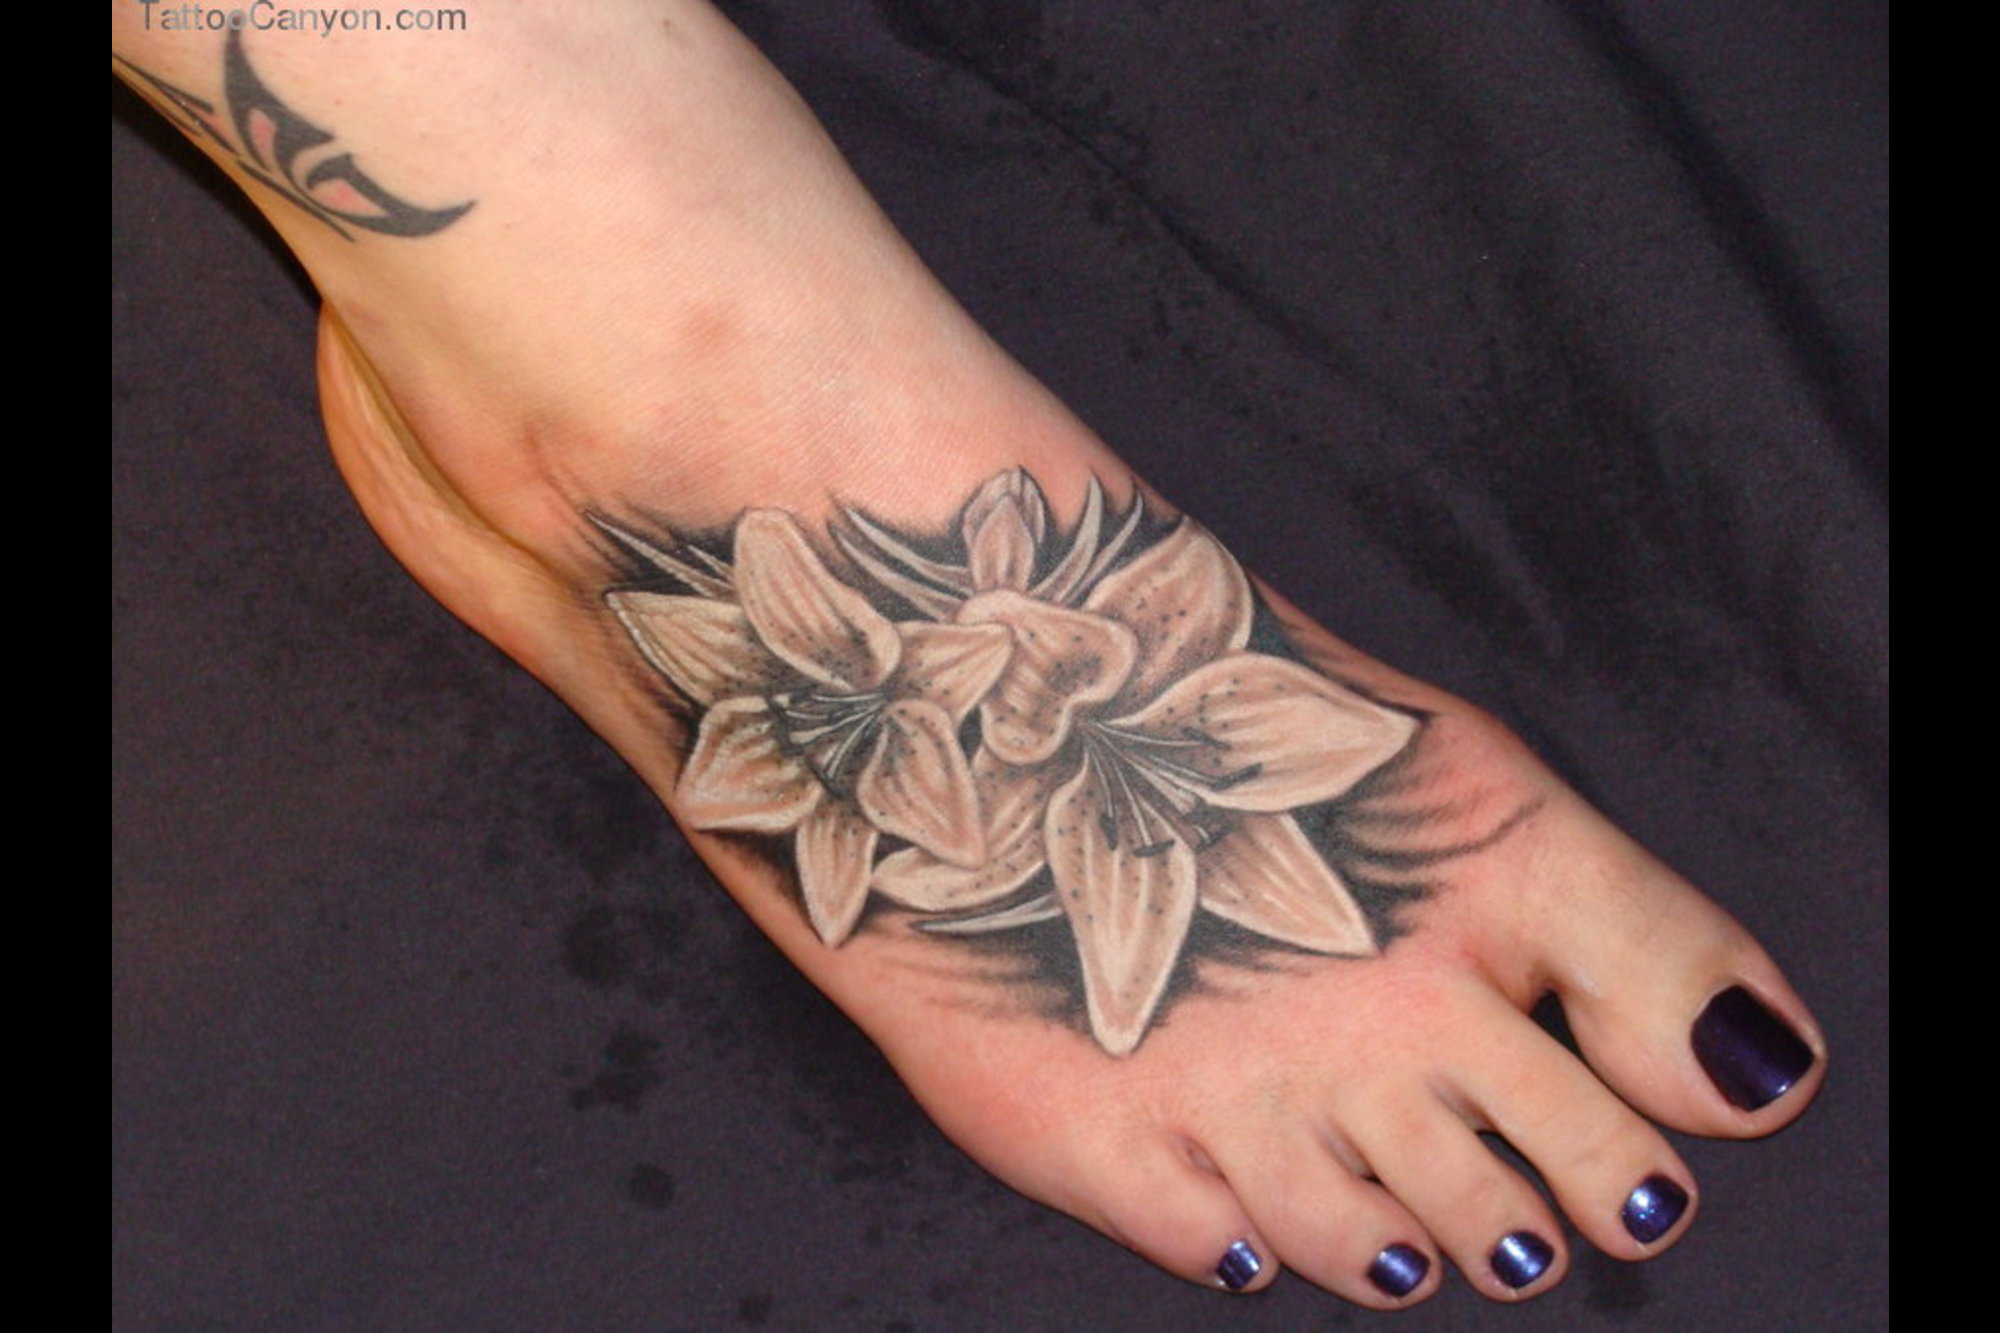  flower ankle tattoos designs and ideas tattoo design  Ankle Tattoo Design Ideas